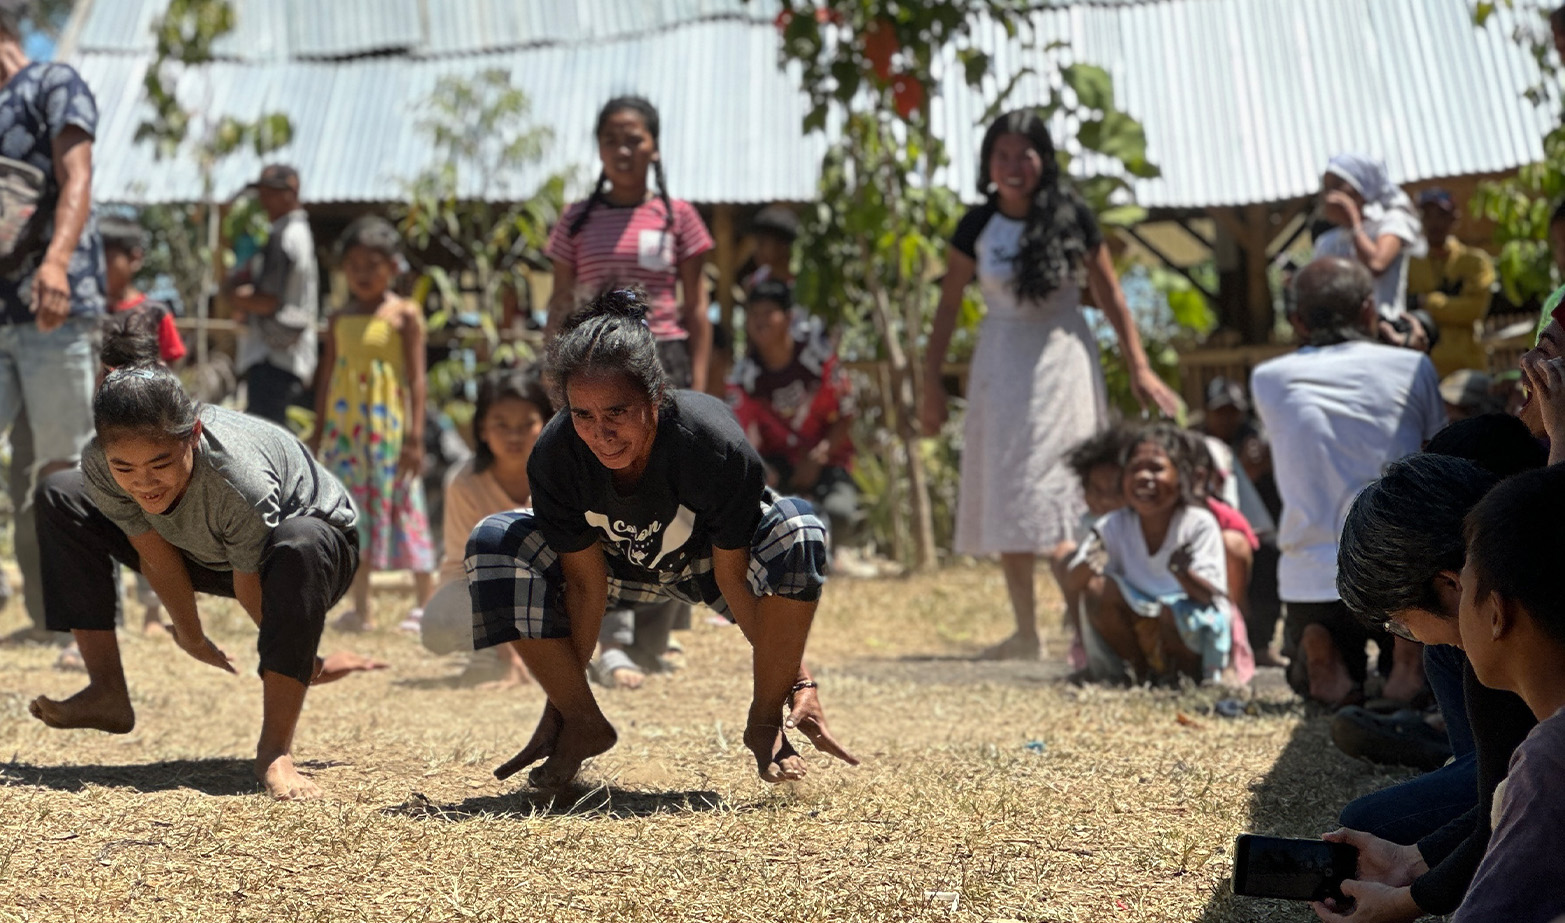 Embracing heritage and culture, the community comes together to play a traditional game that has been passed down through generations. (SAMDHANA/Xenia)